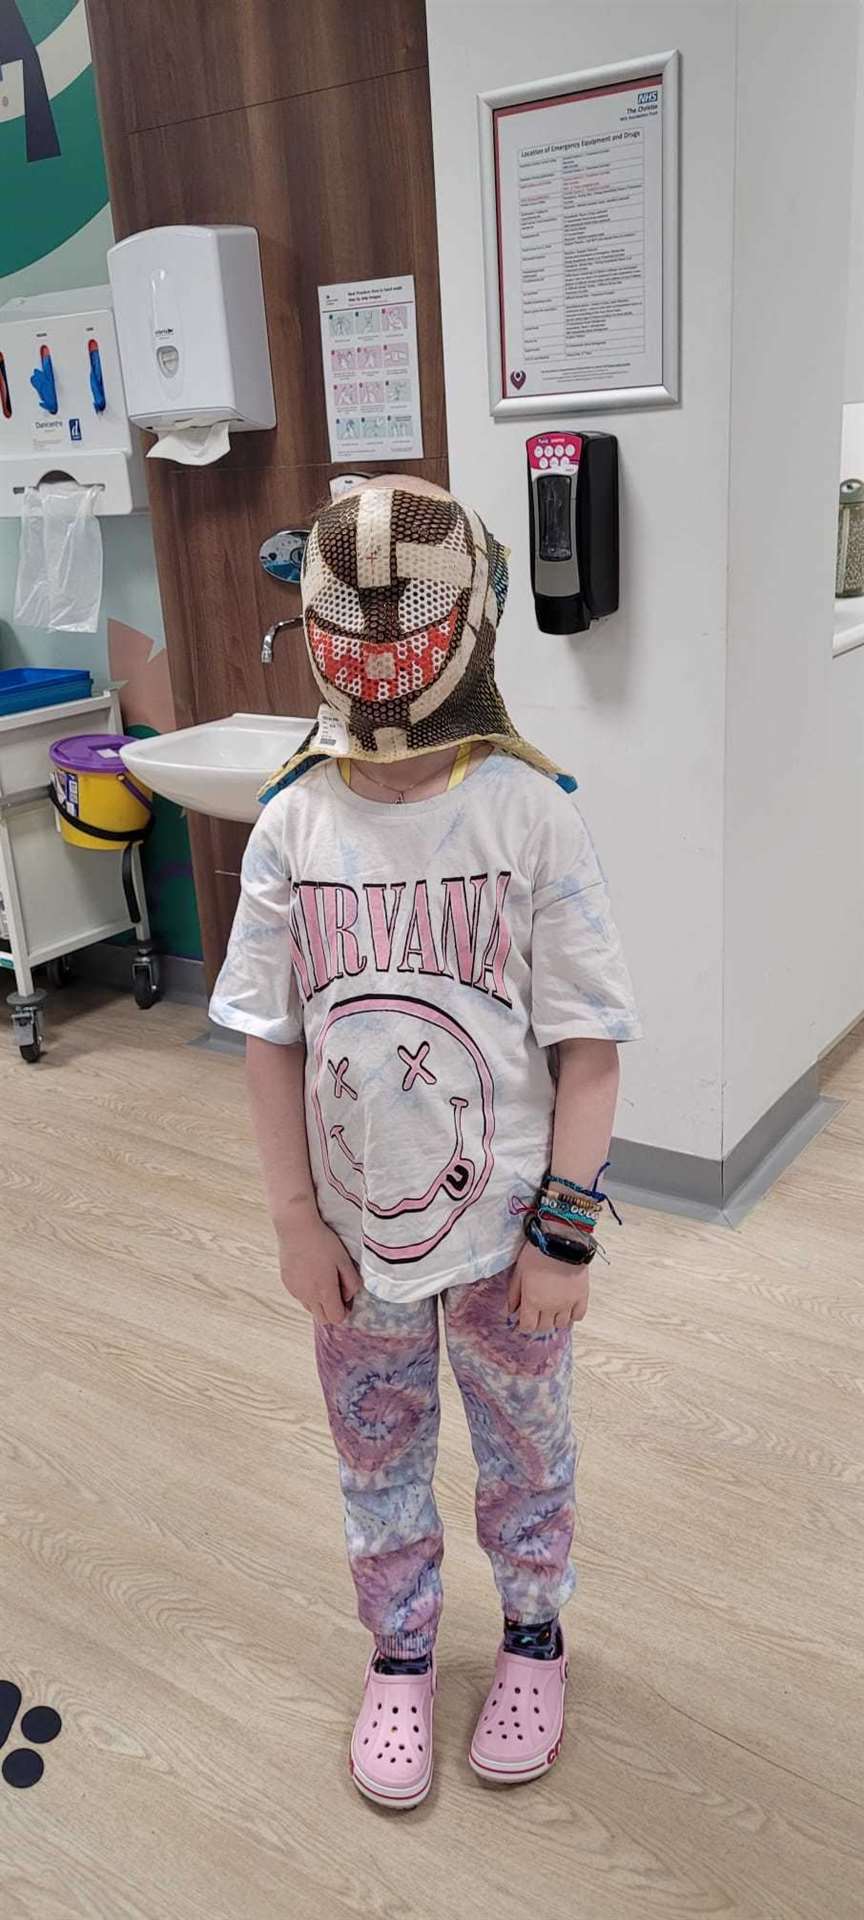 She was fitted with a made-to-measure mask for her treatment which she painted as the Marvel character Venom.